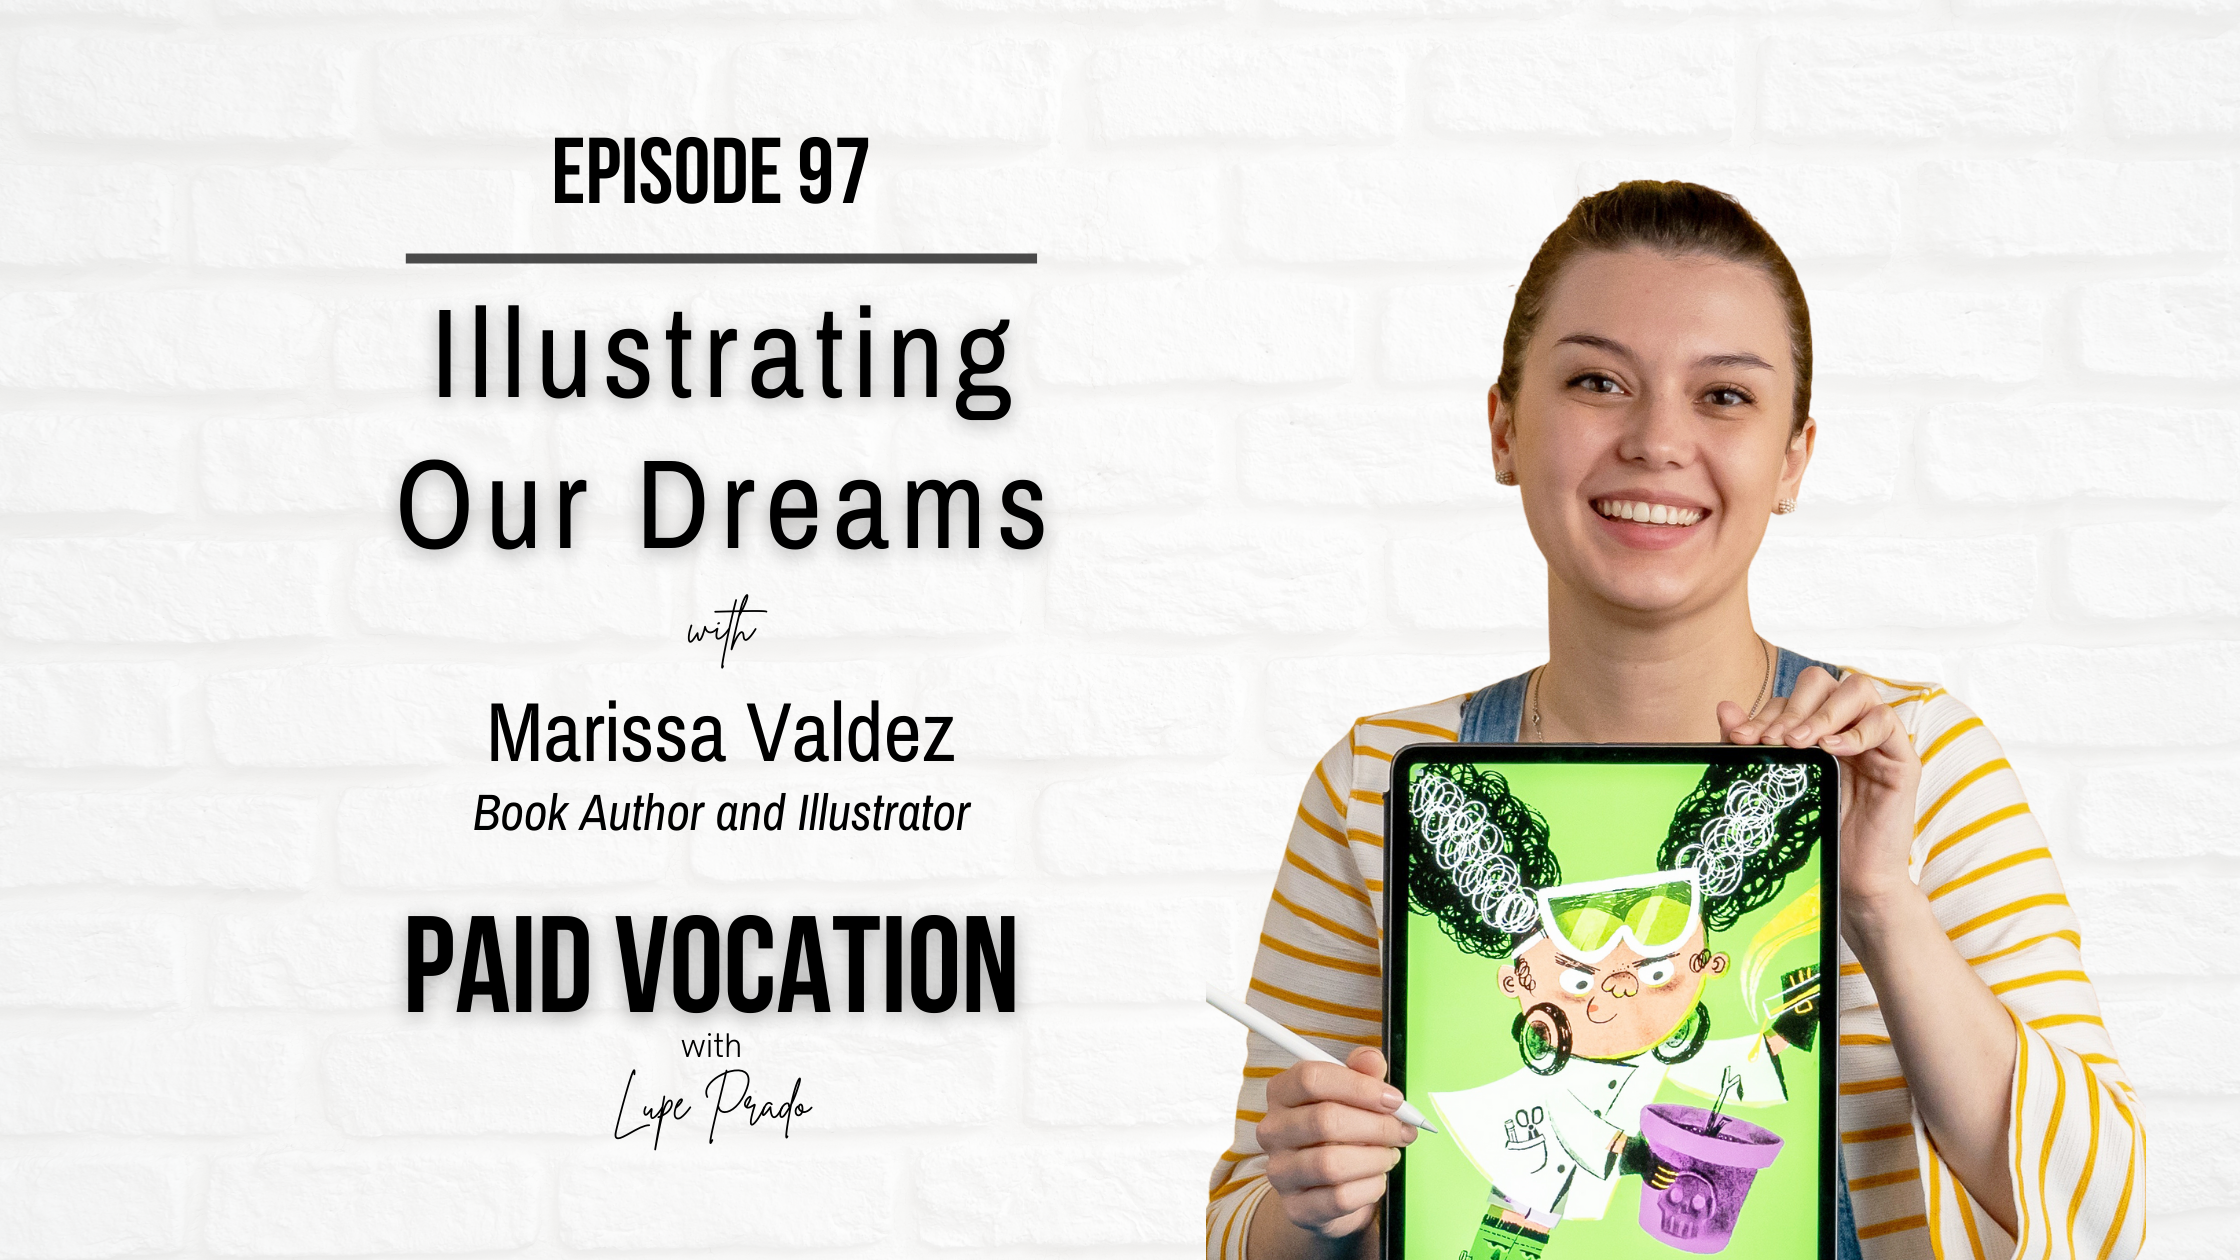 Illustrating Our Dreams with Marissa Valdez